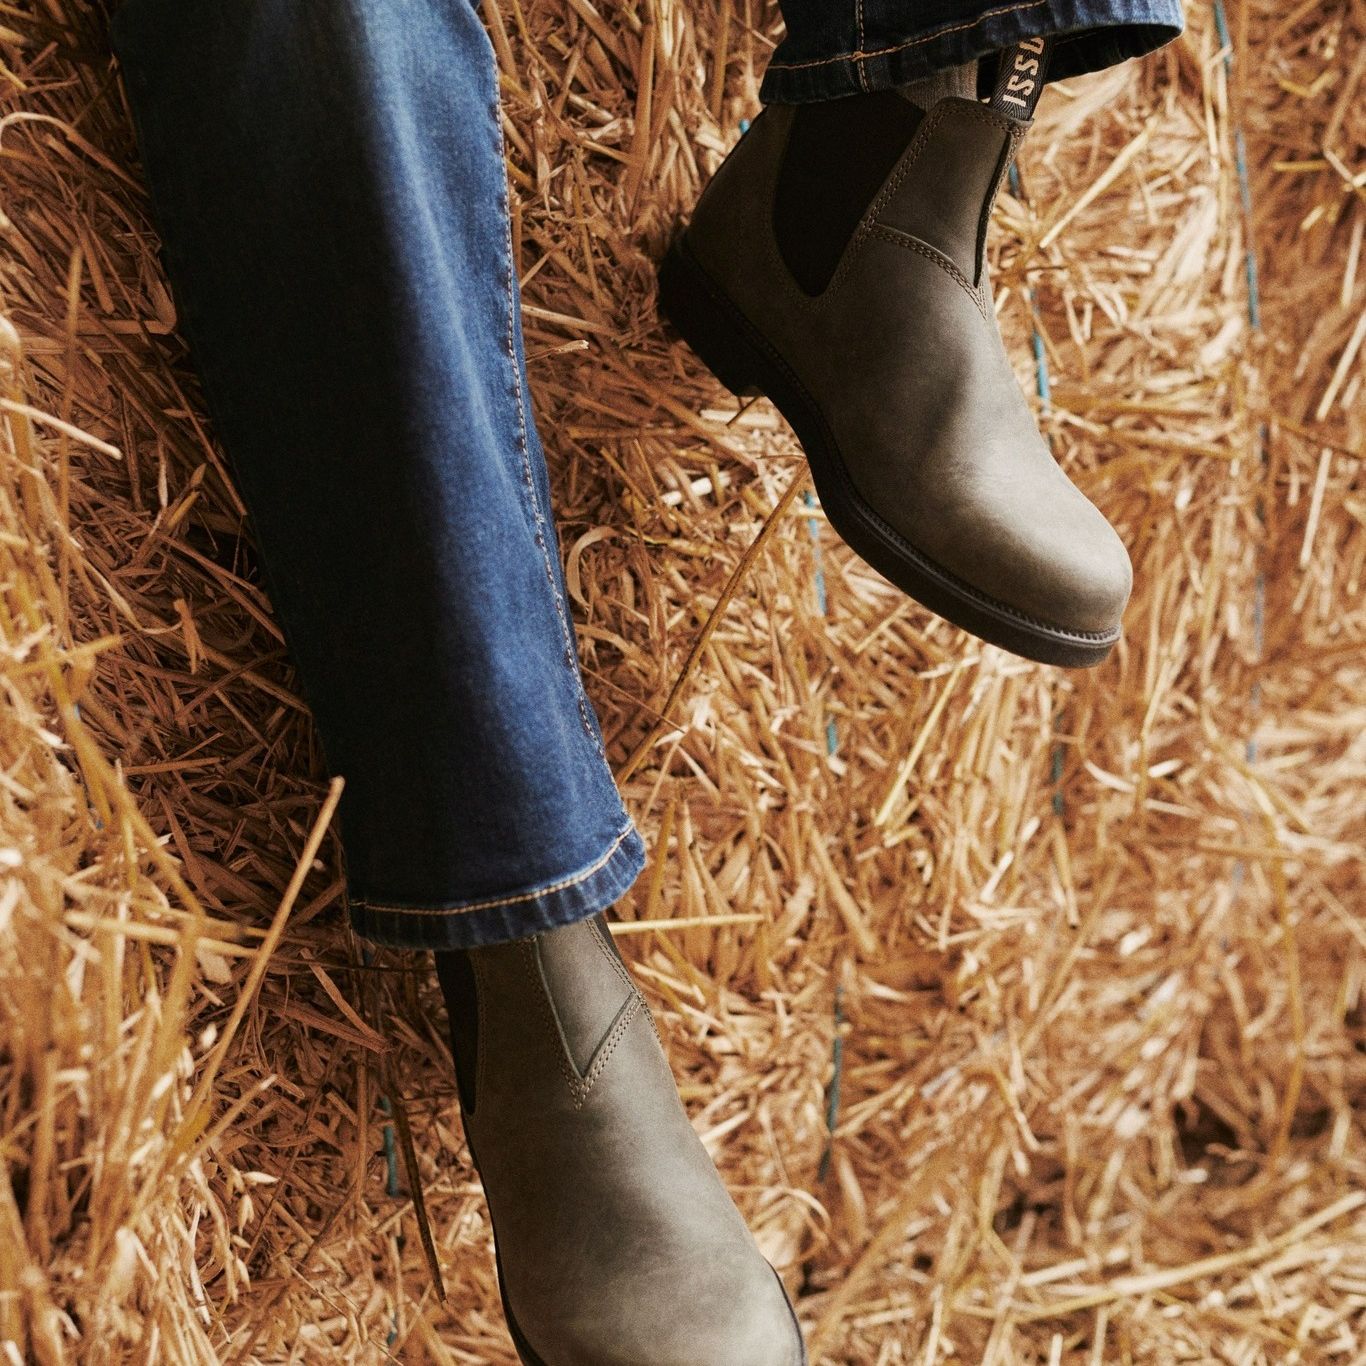 Experience timeless comfort with rugged ...

Shop the range via the link in bio. 

#RossiBoots